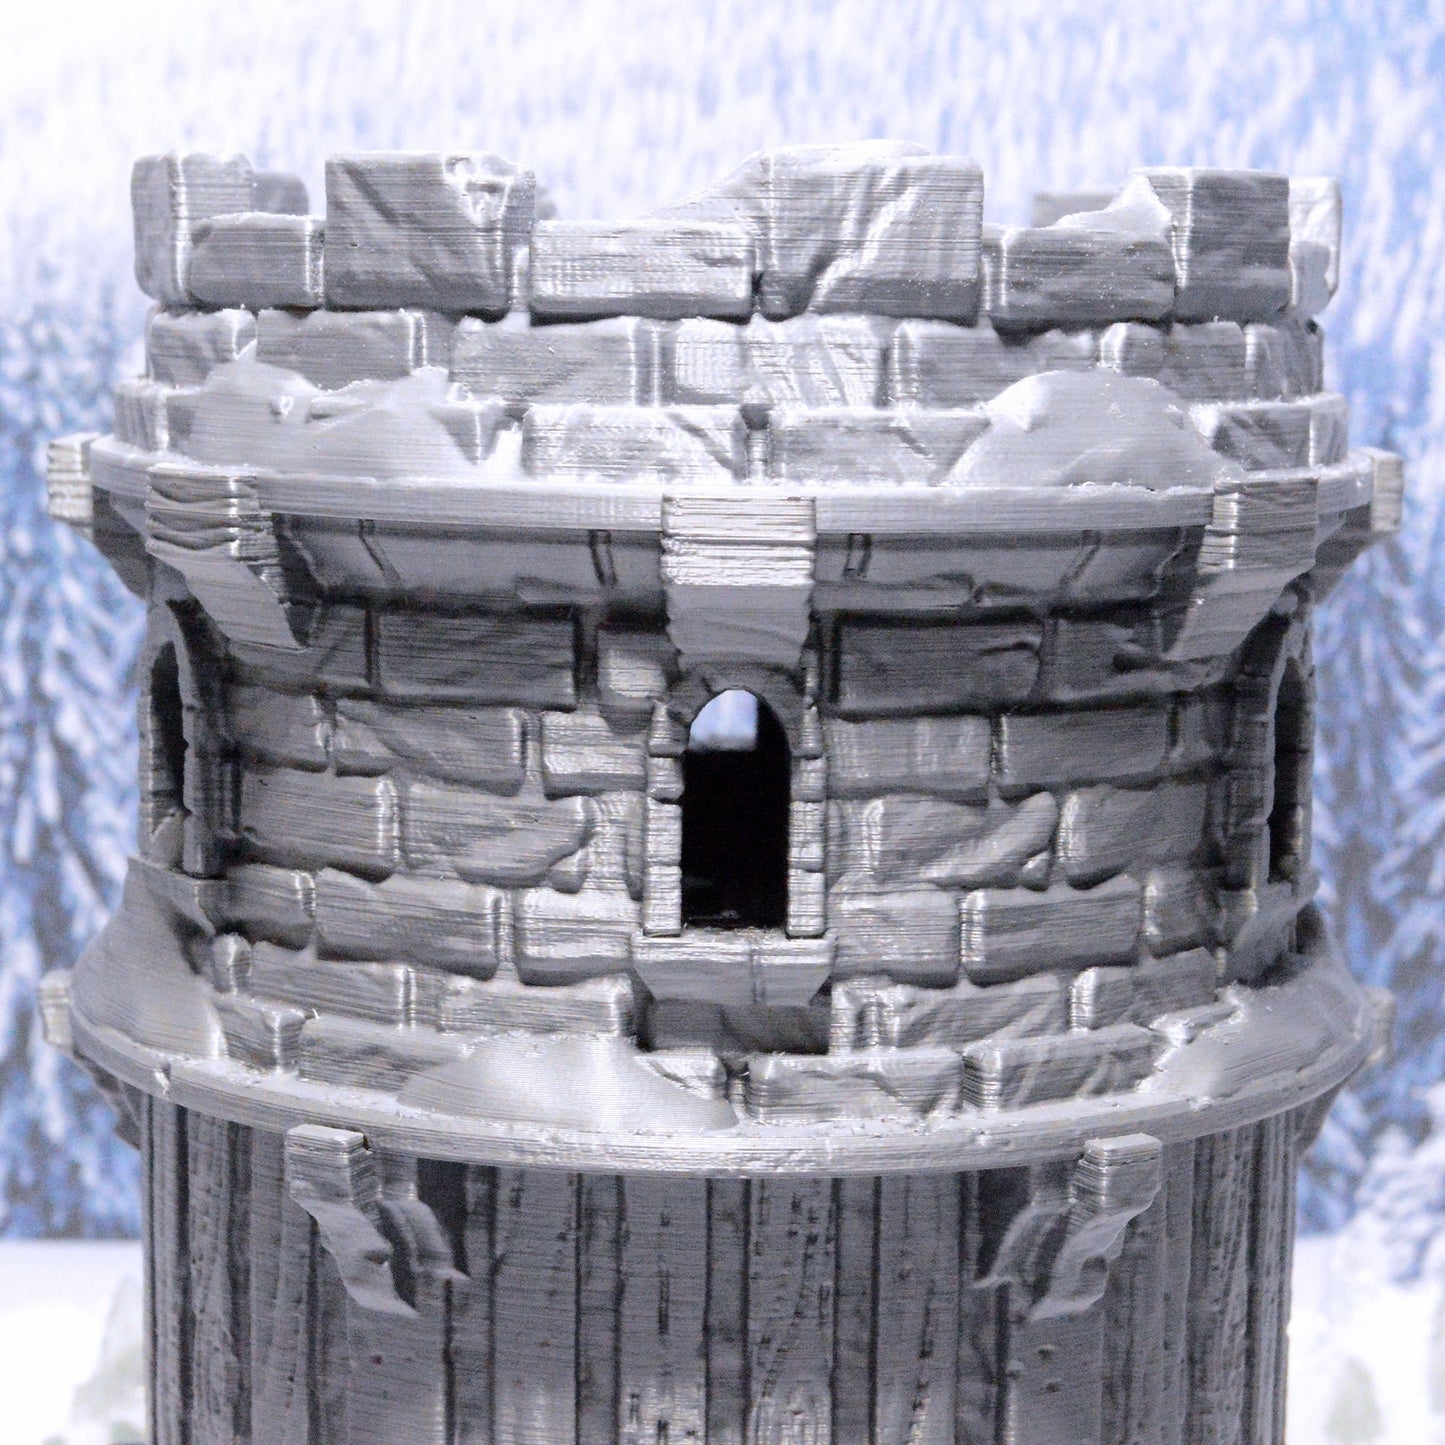 Frozen Watchtower 15mm 28mm 32mm for D&D Icewind Dale Terrain, DnD Pathfinder Frostgrave Arctic Snowy Icy